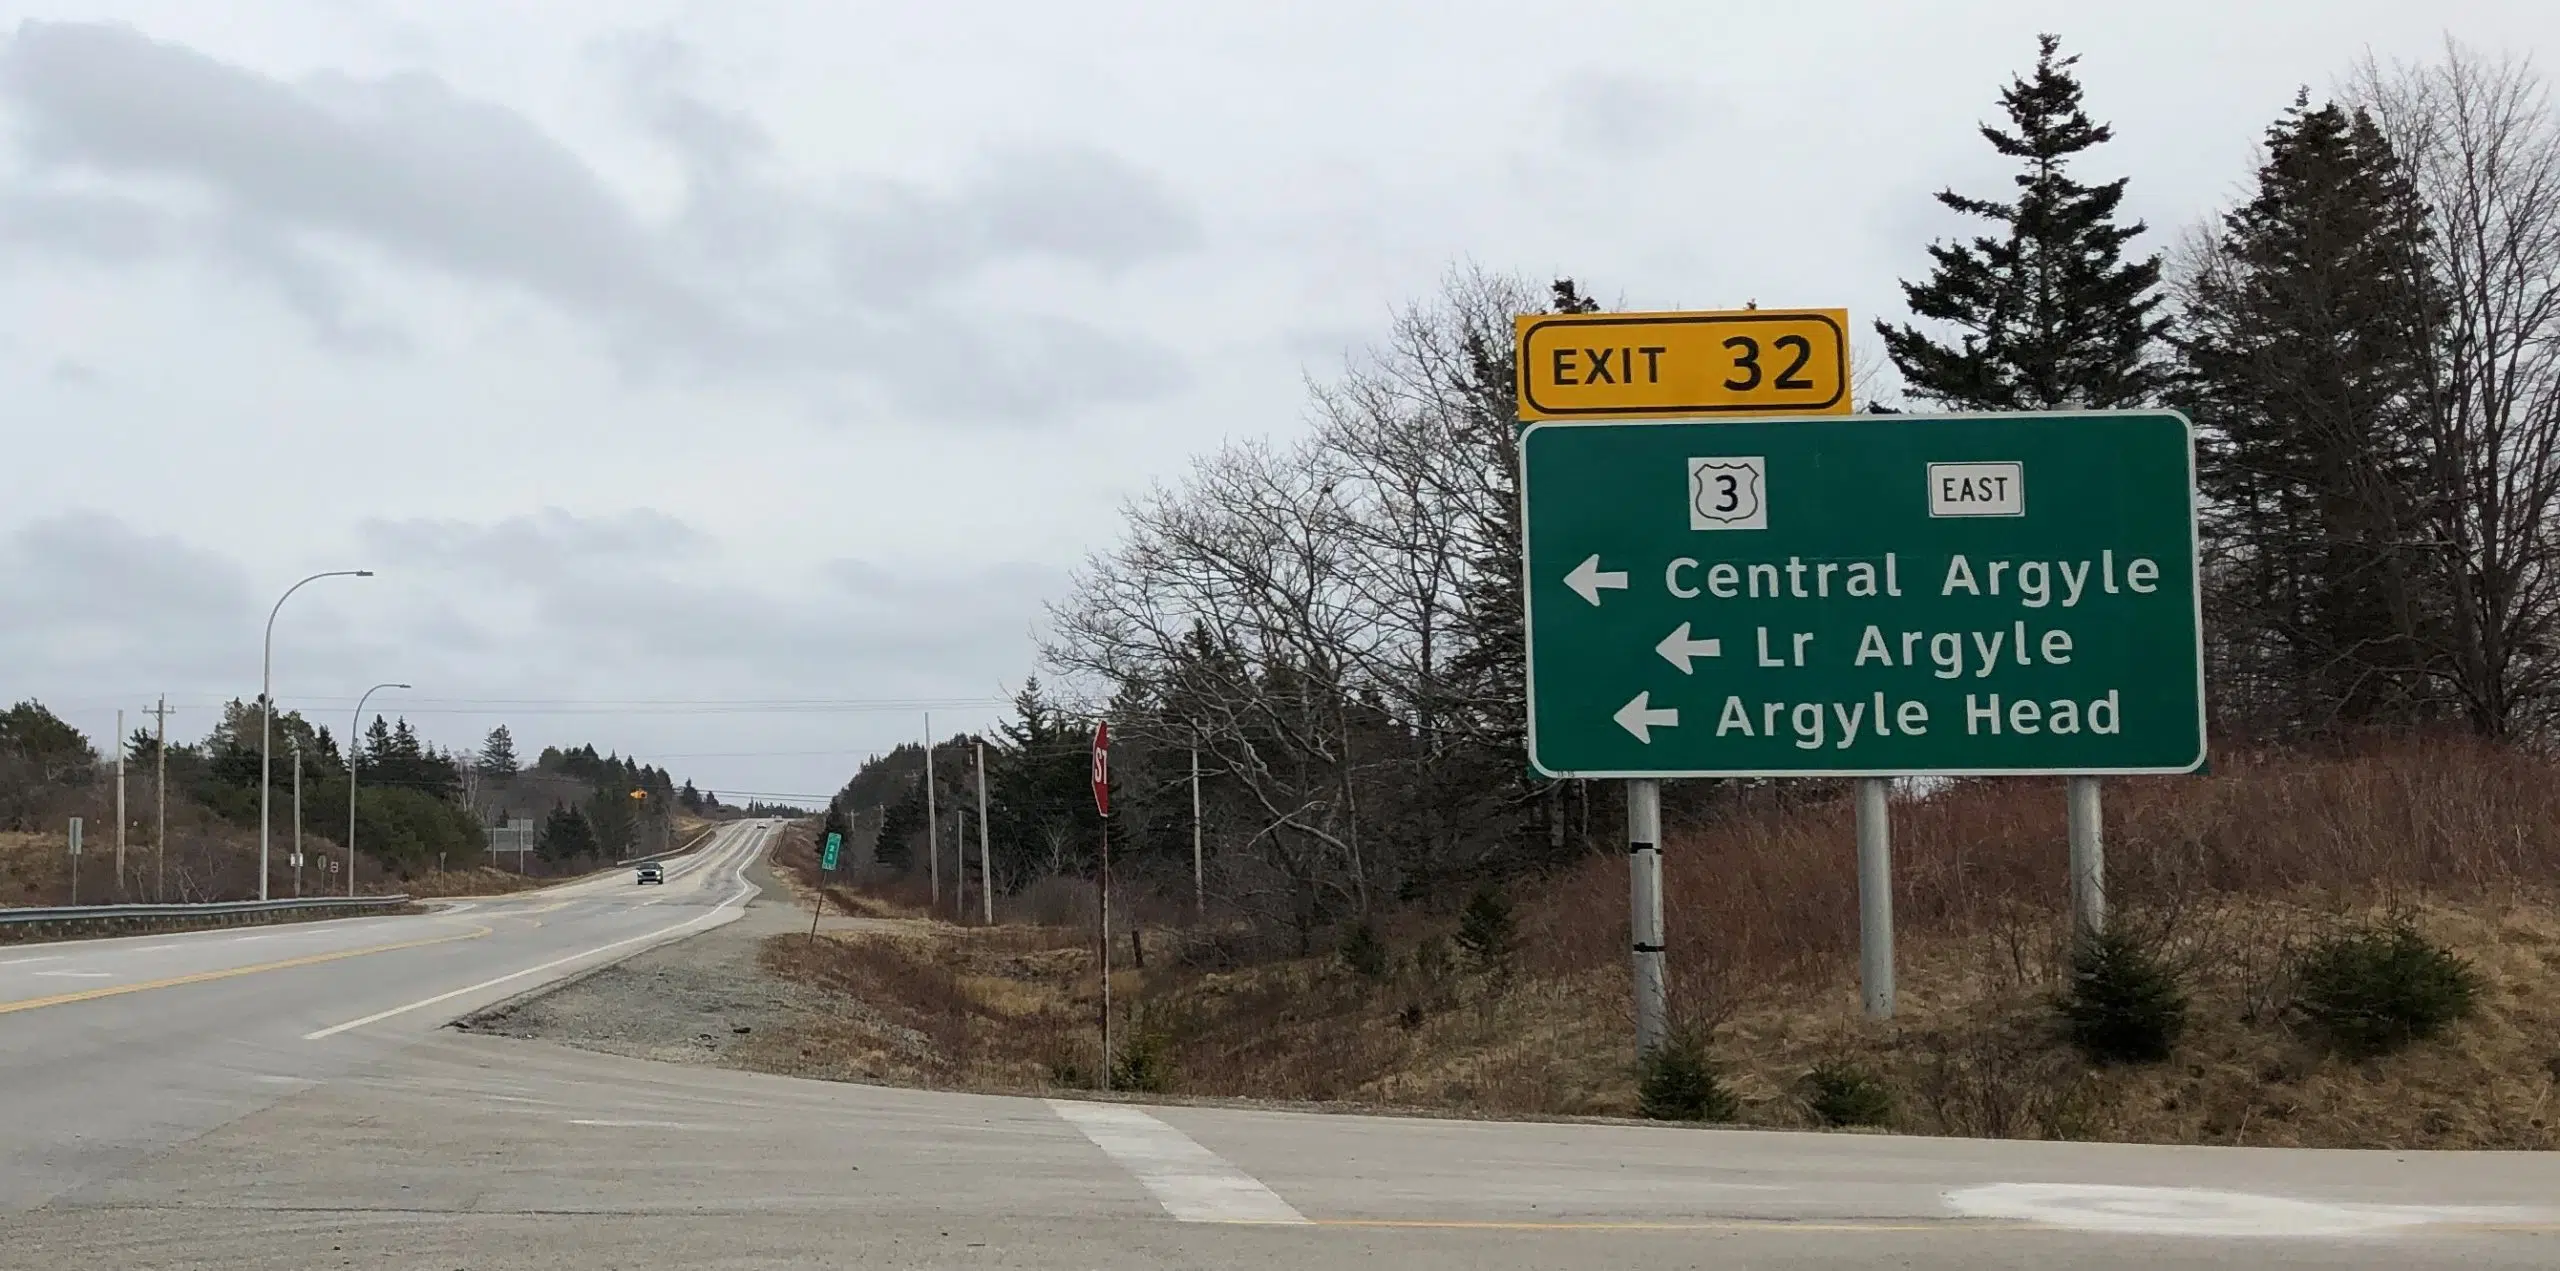 Changes In The Offing For Exit 32